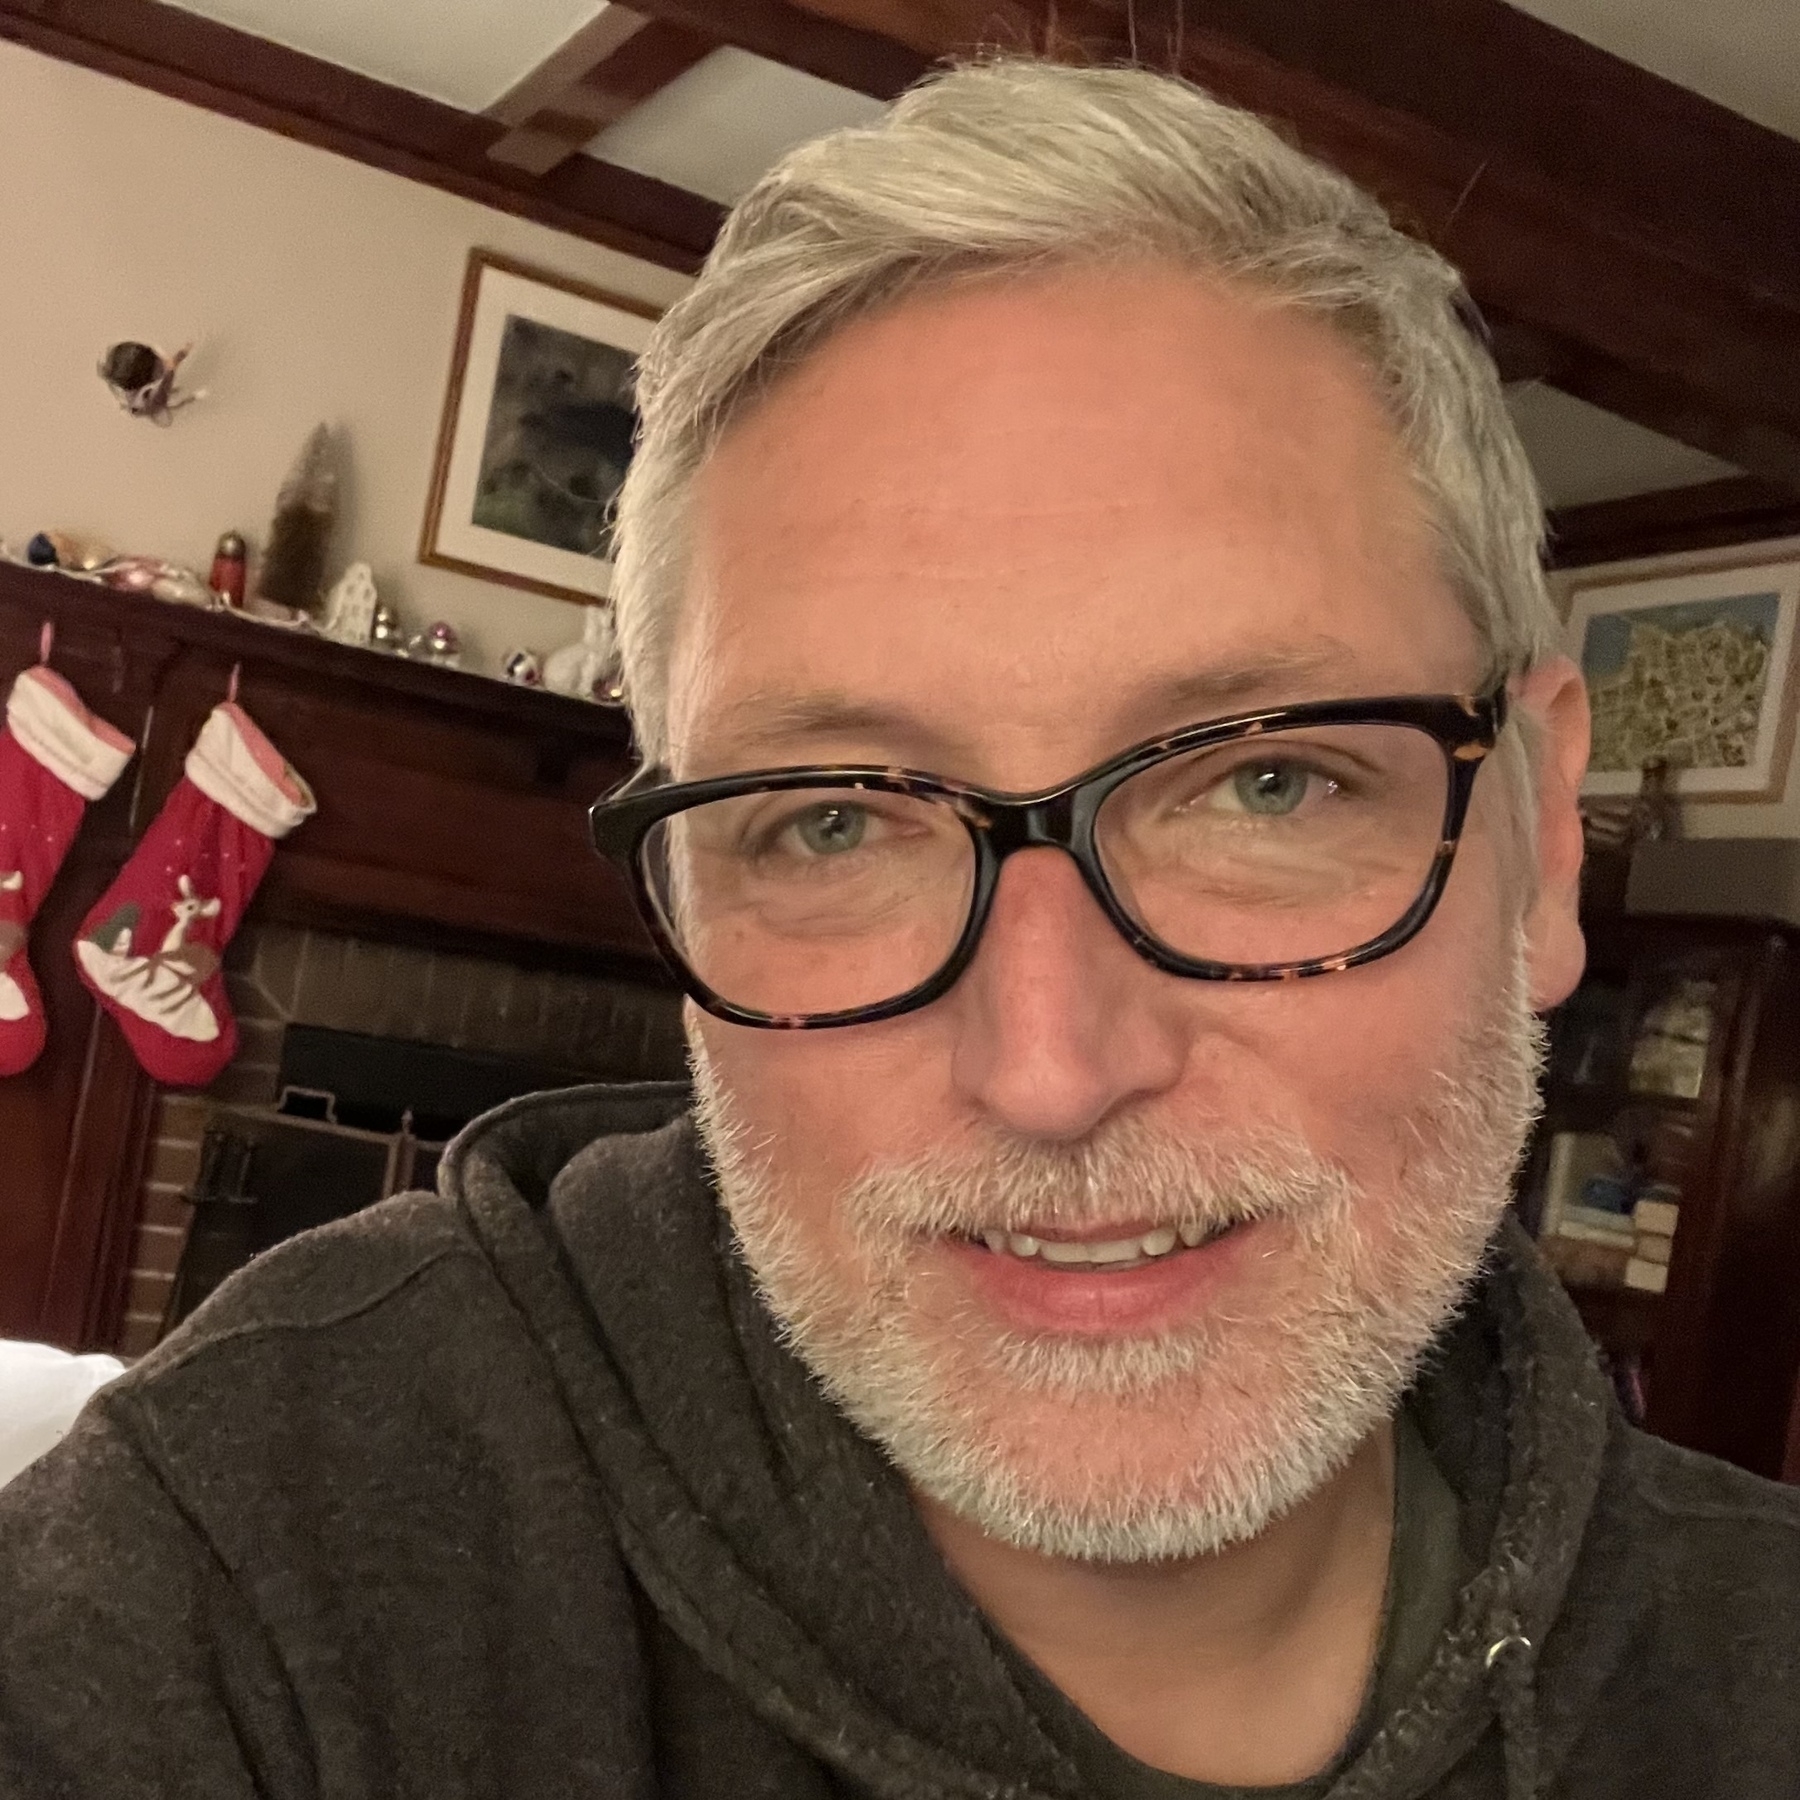 Selfie of a man with gray hair, a reddish complexion, wearing glasses, and gray/white beard, about 1/4 inch long. Background a living room with stockings on a fireplace mantel.